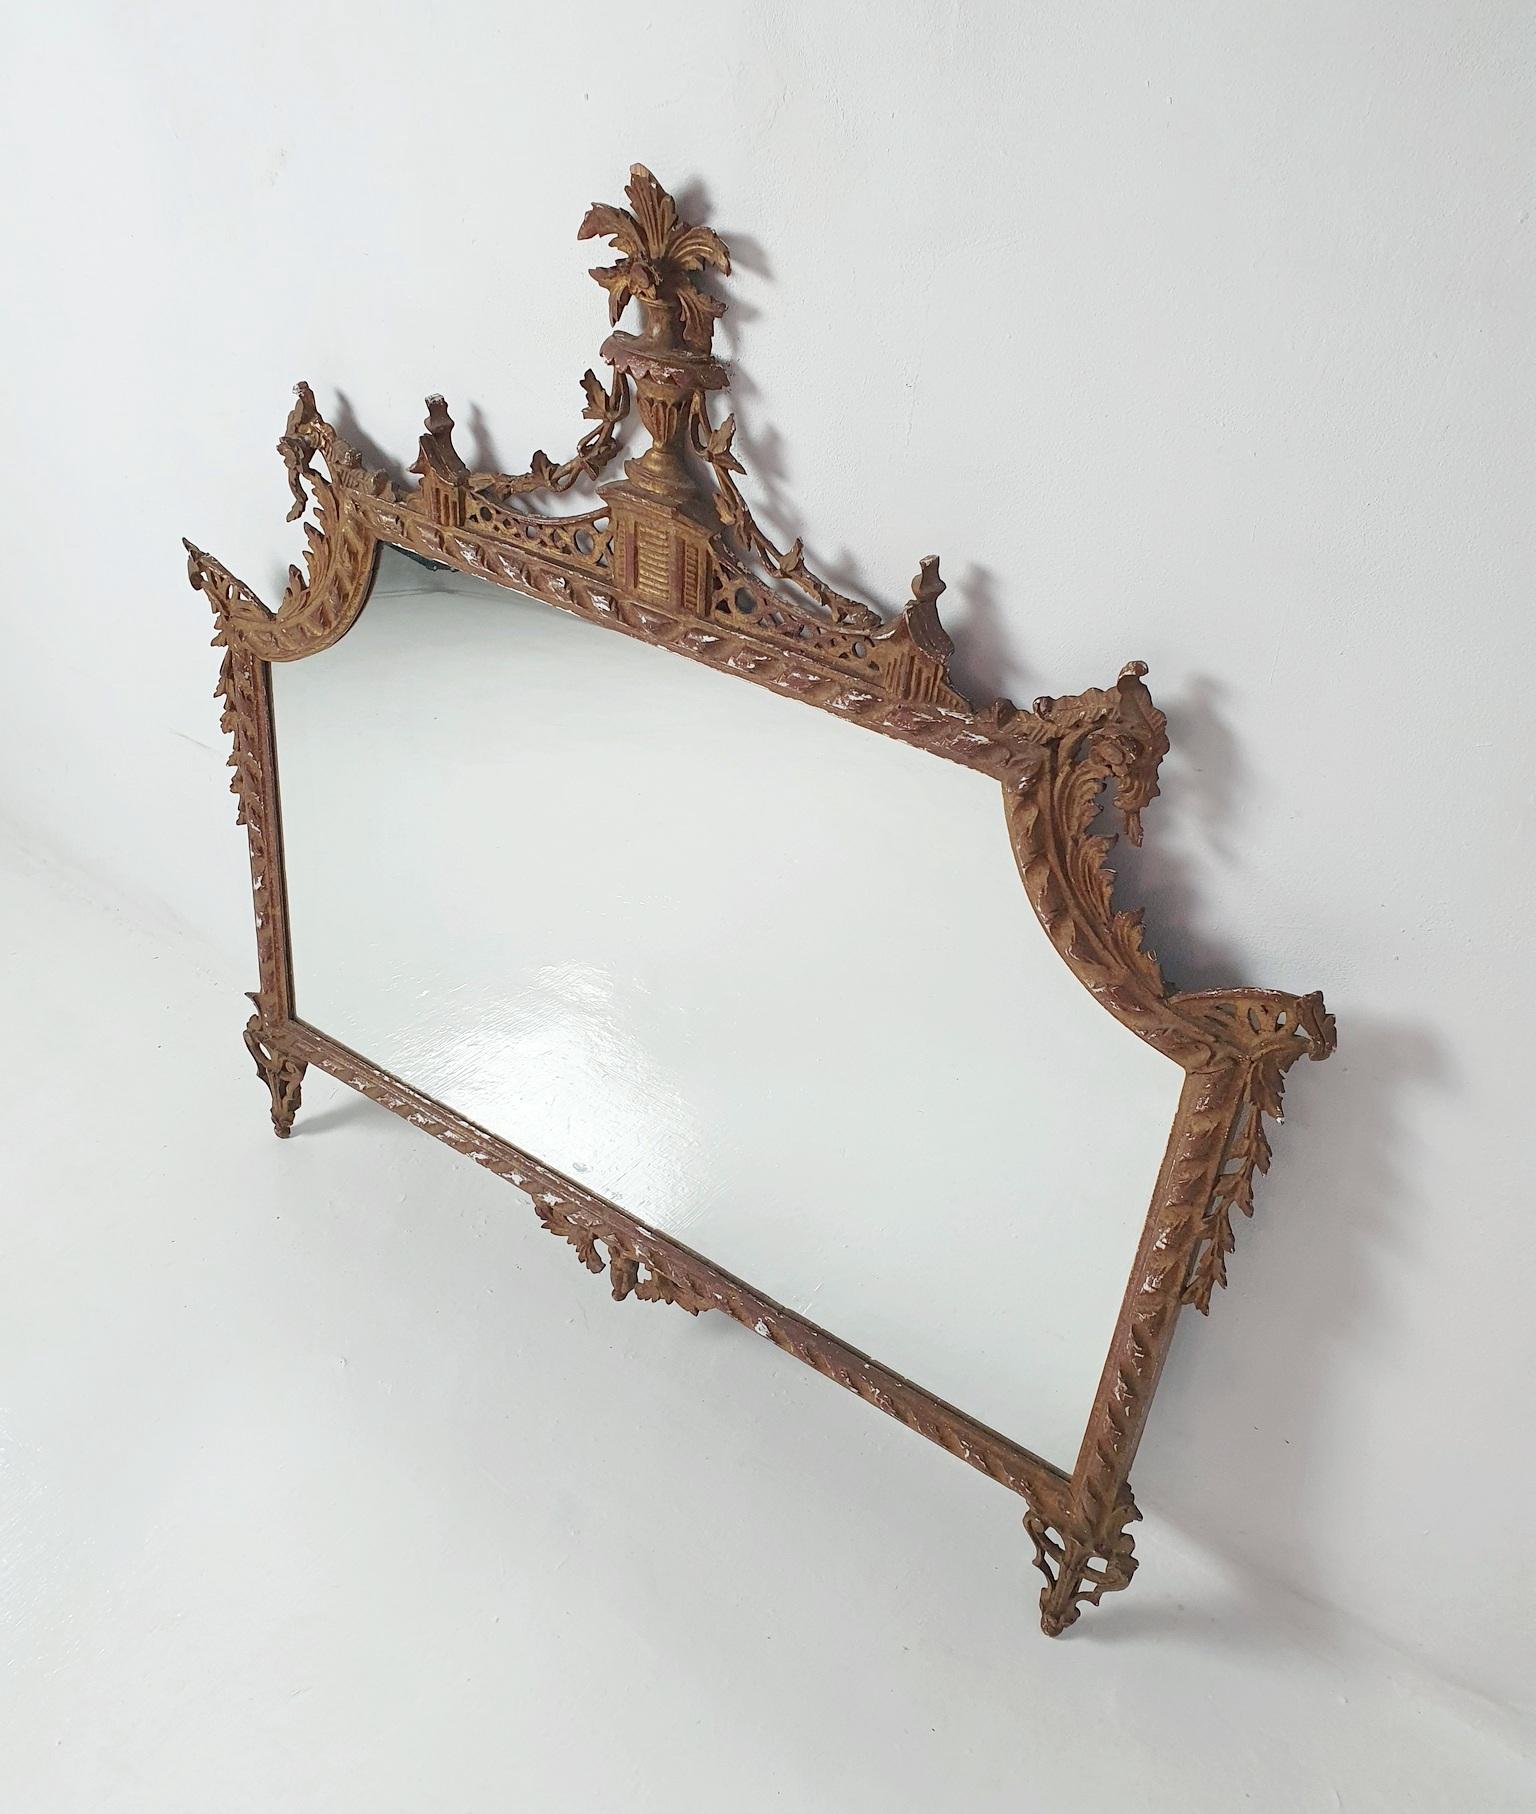 An Italian reproduction hand carved gorgeous overmantle mirror representing a delicate style of the second half of the 1700's. The mirror is made entirely from wood, stucco and guilded. The gold is worn in places only adding to it's charm. Overall